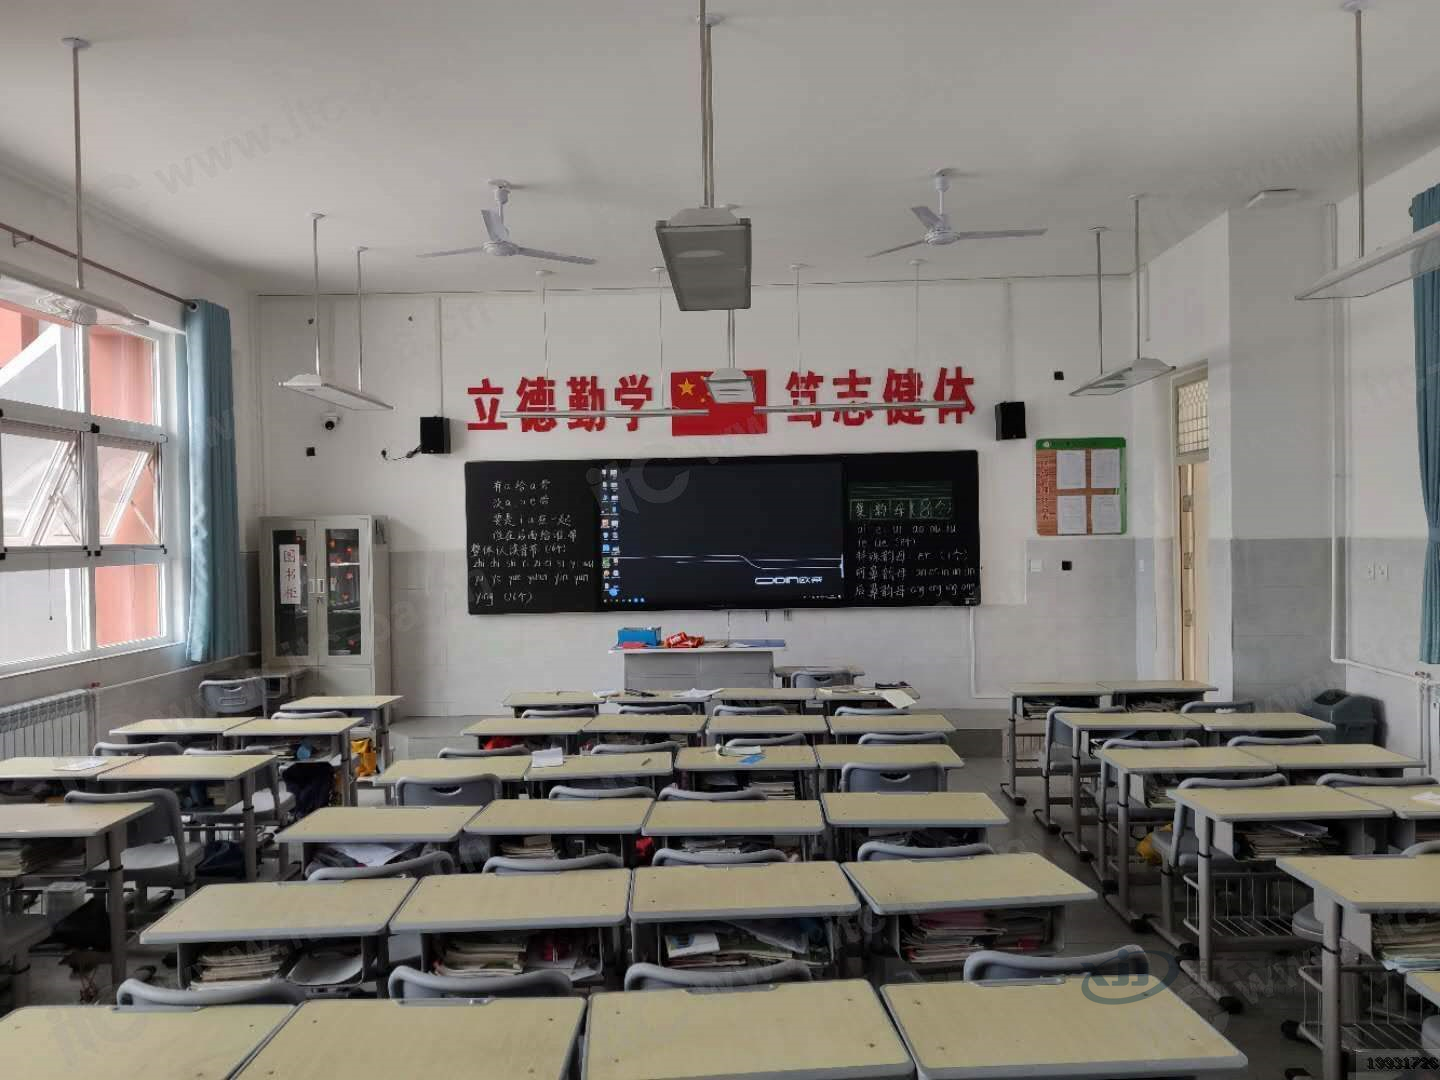 Comprehensive Solution for Smart Pipe Network Construction in Primary School Smart Campus One Card System Attendance Jialang Smart Community Network Warehouse Management System